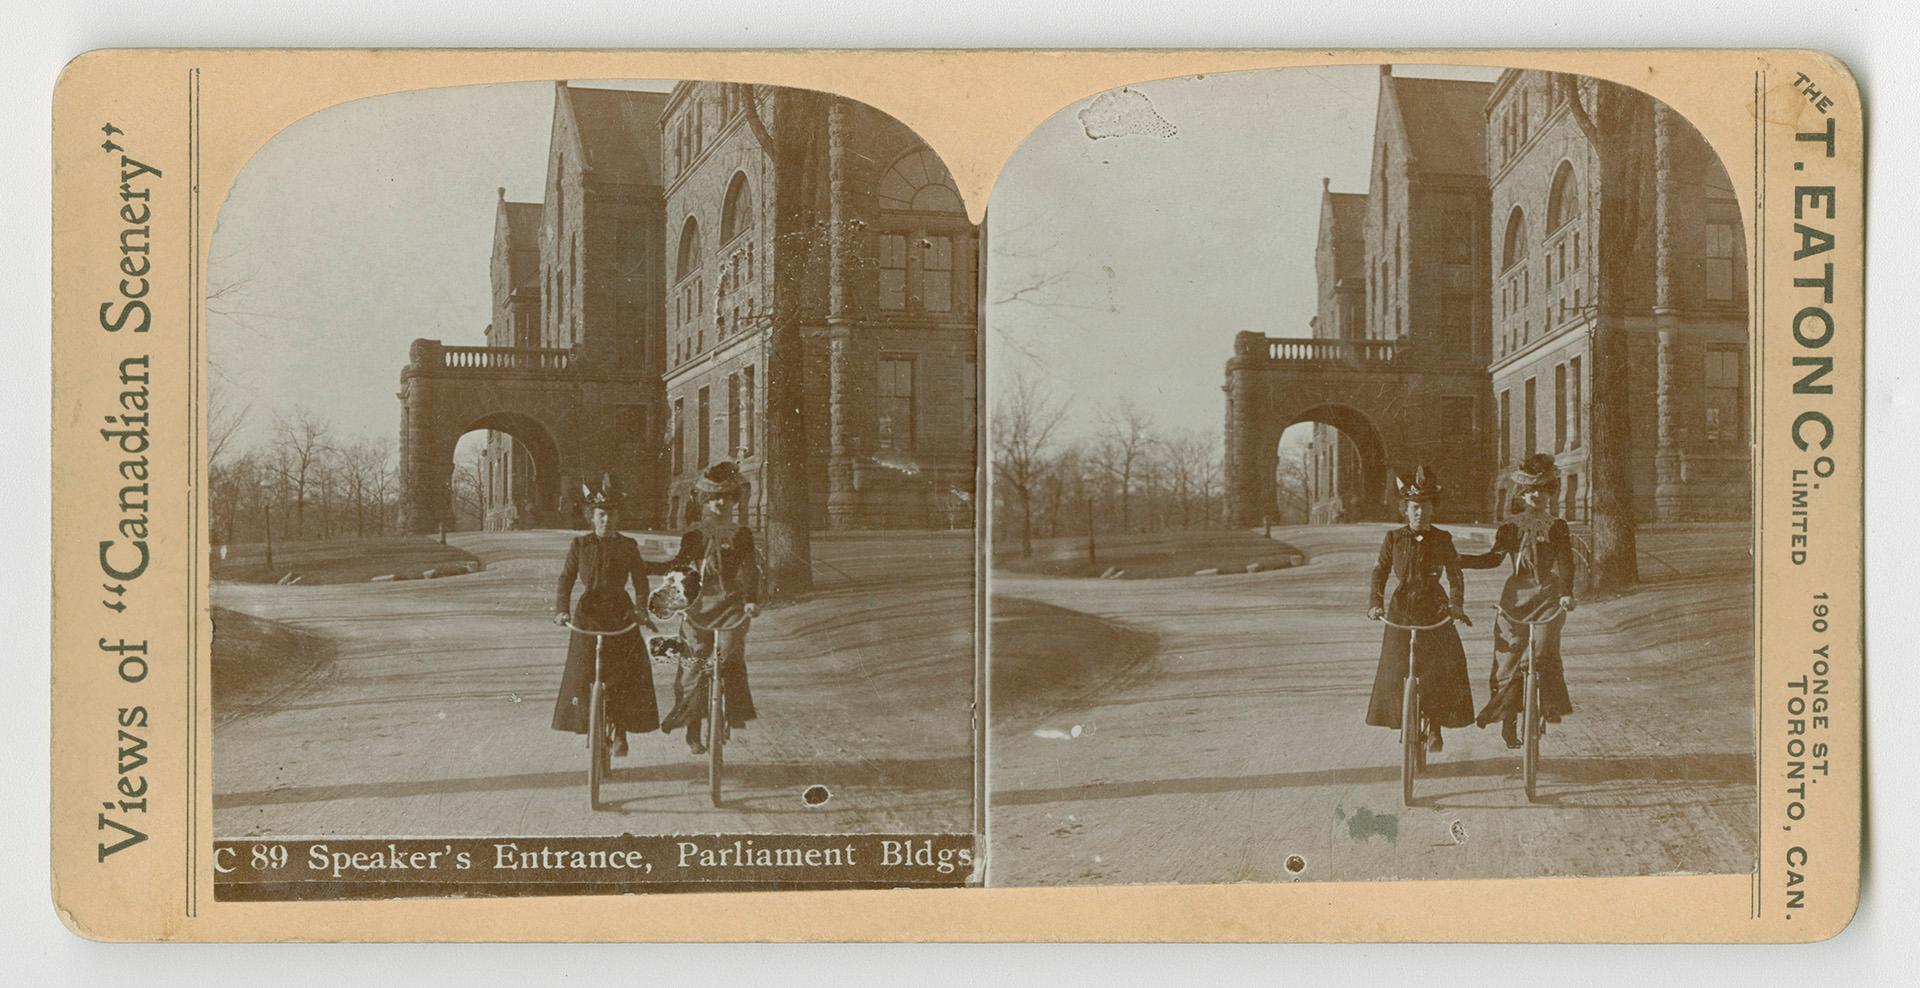 Pictures show two women on bicycles on a path in front of a covered entrance of a very large Ri ...